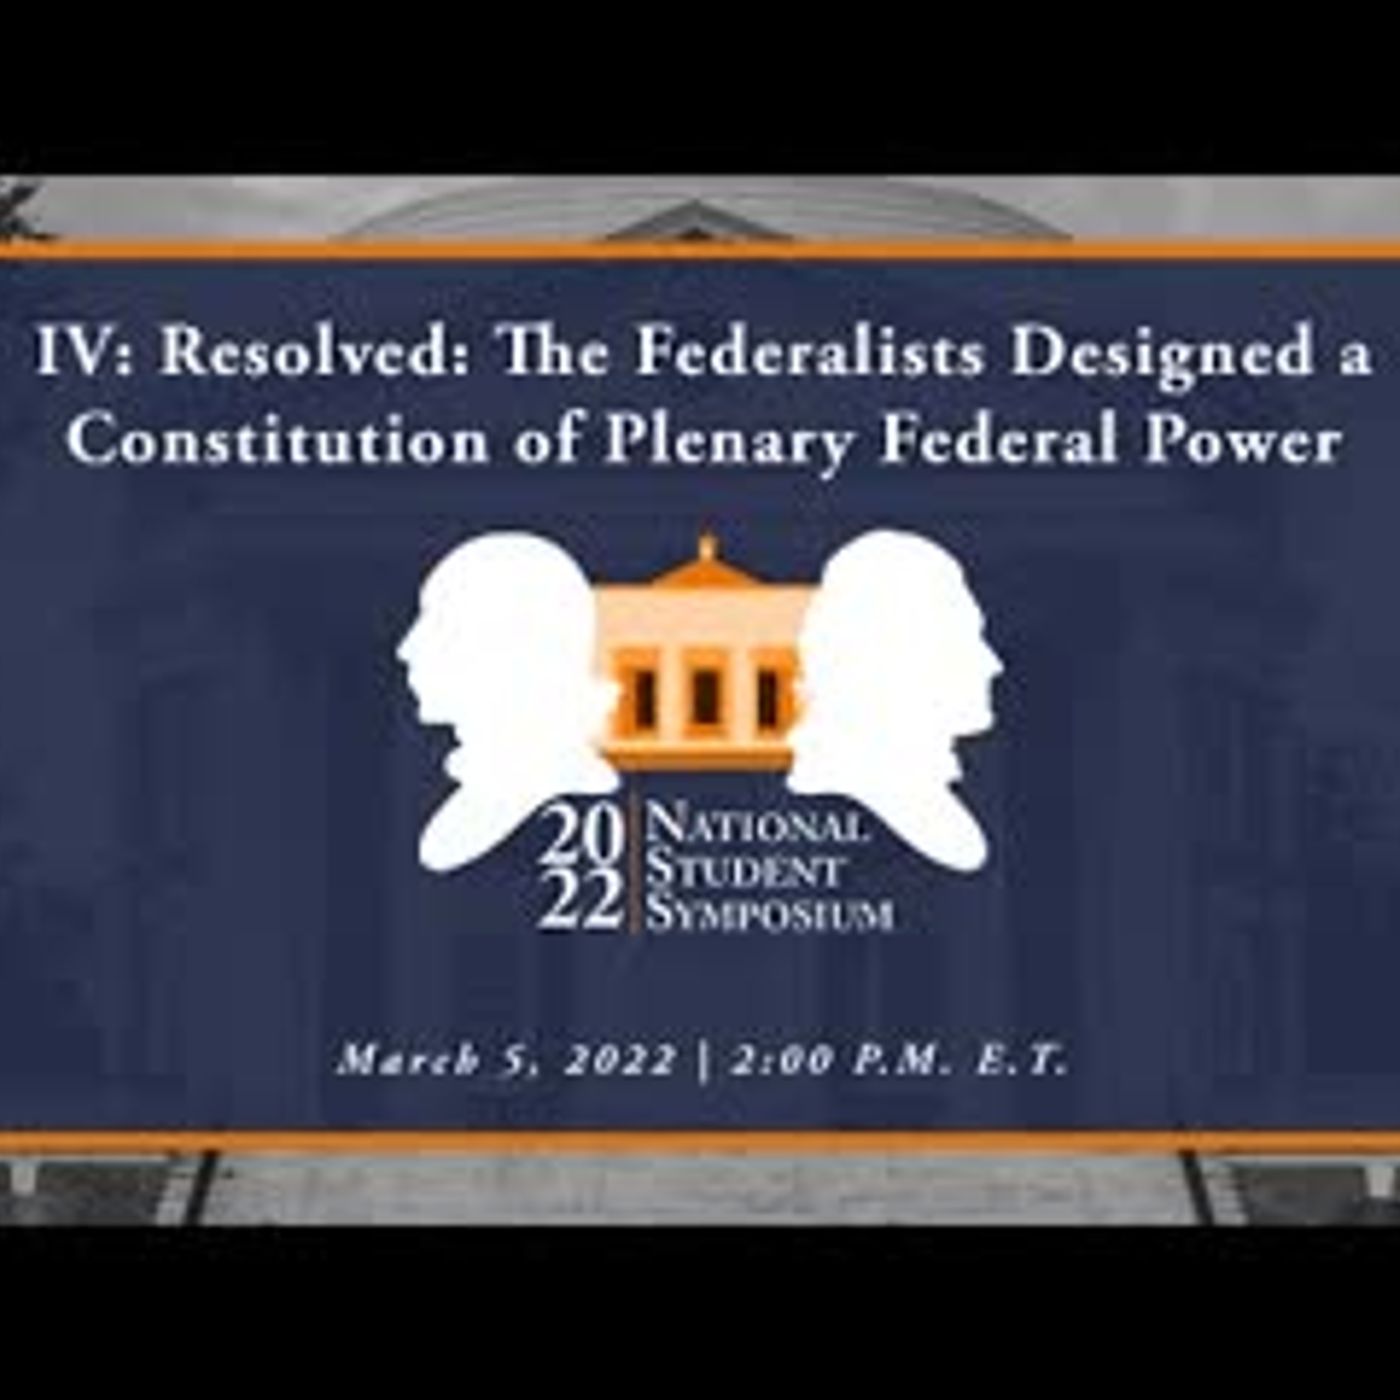 IV: Resolved: The Federalists Designed a Constitution of Plenary Federal Power (Debate)